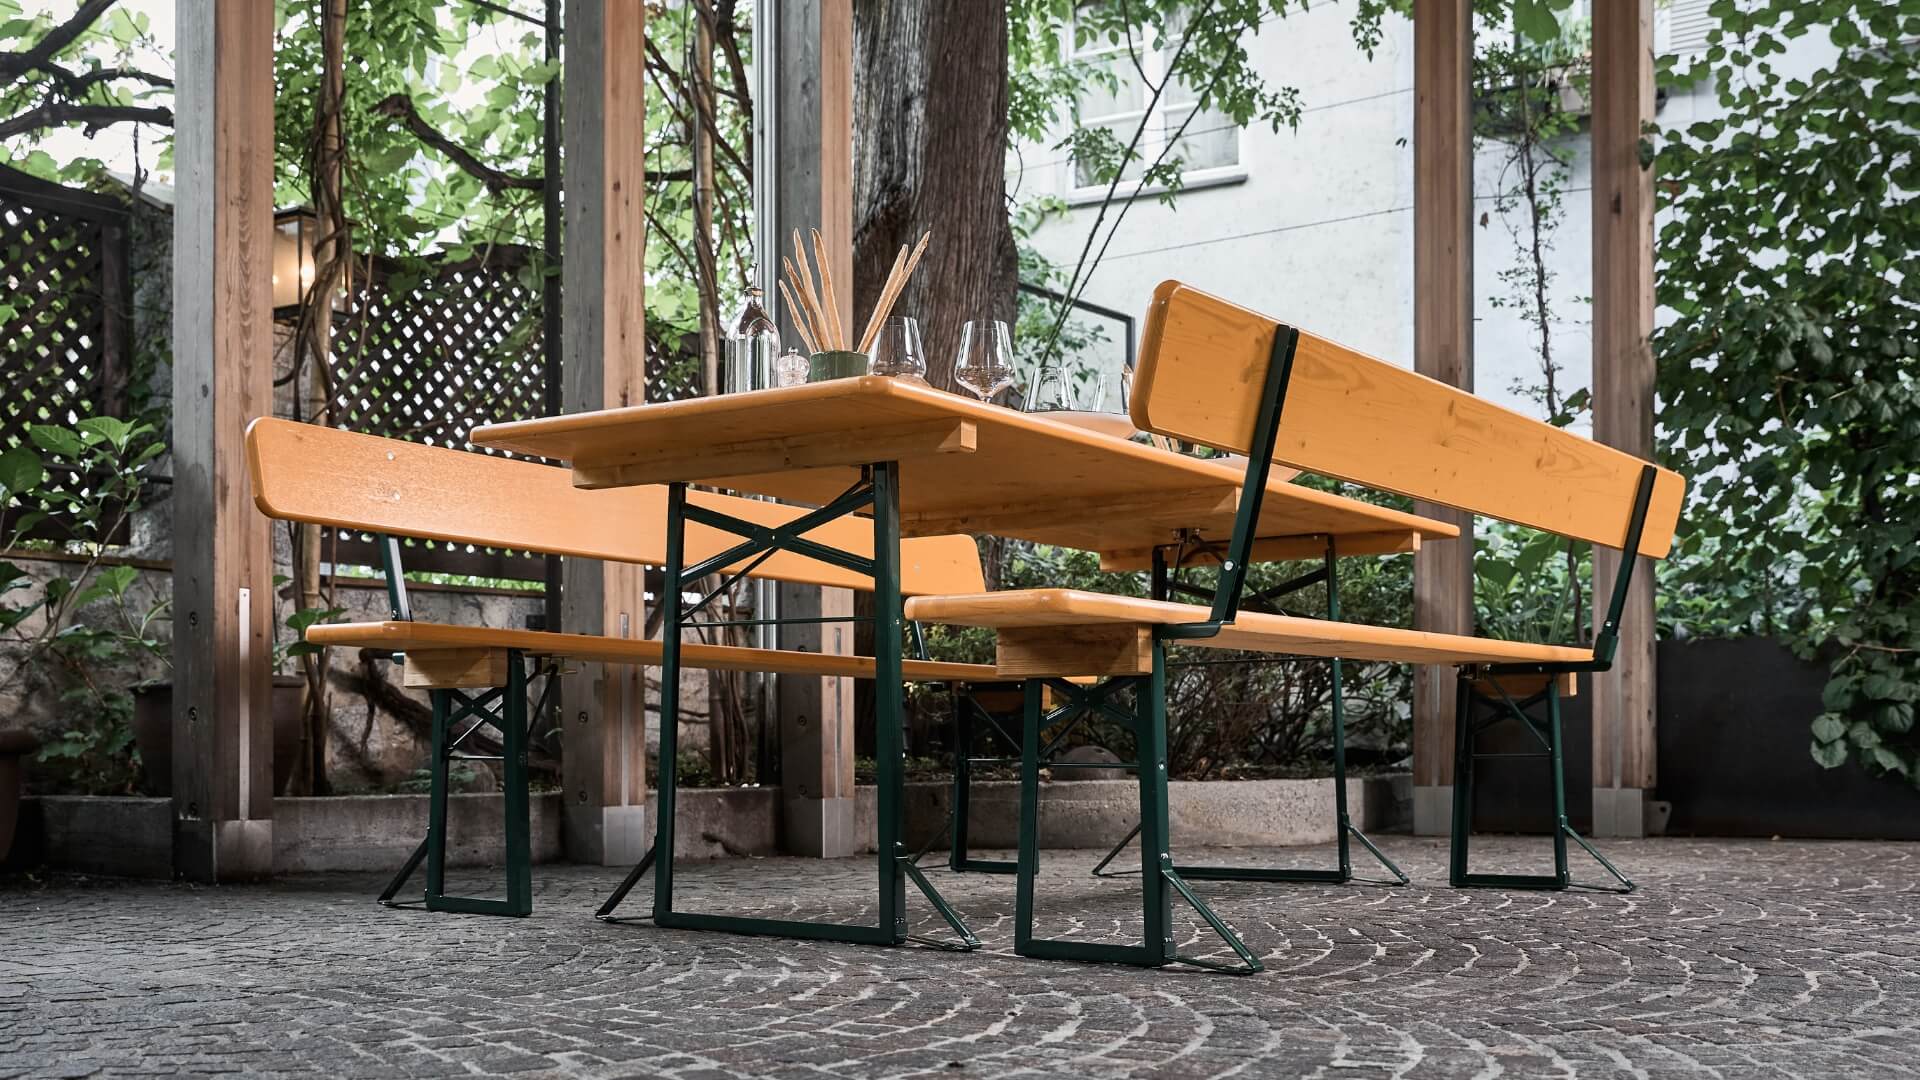 The wide beer garden table set was placed and decorated in the outdoor area of a restaurant.